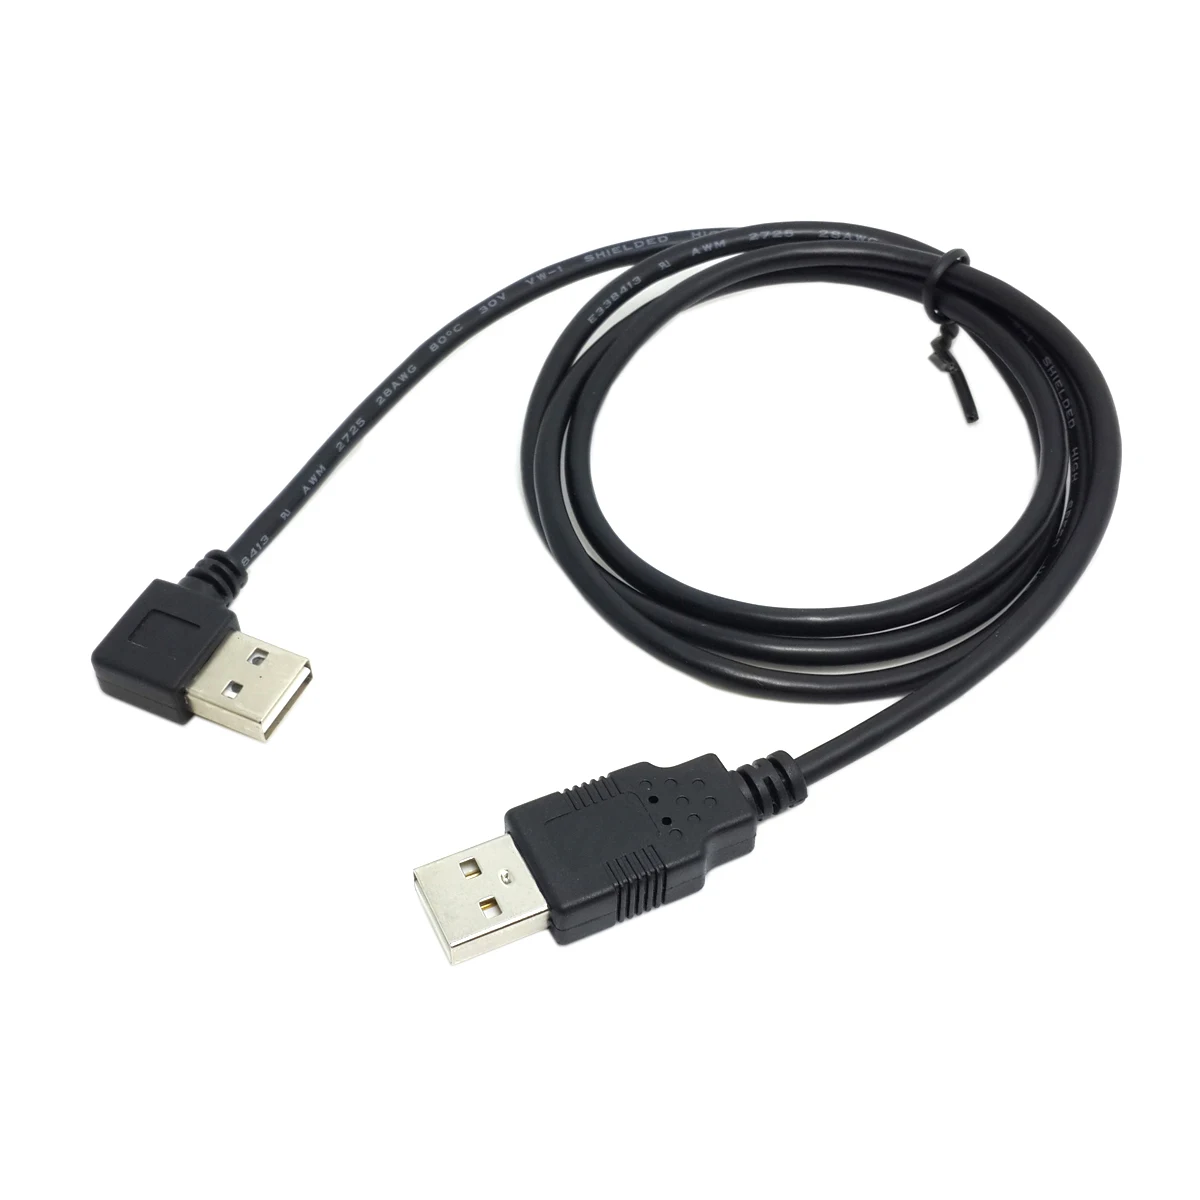 

Cablecc CY 100cm USB 2.0 Male to Male Data Cable Reversible Design Left & Right Angled 90 Degree